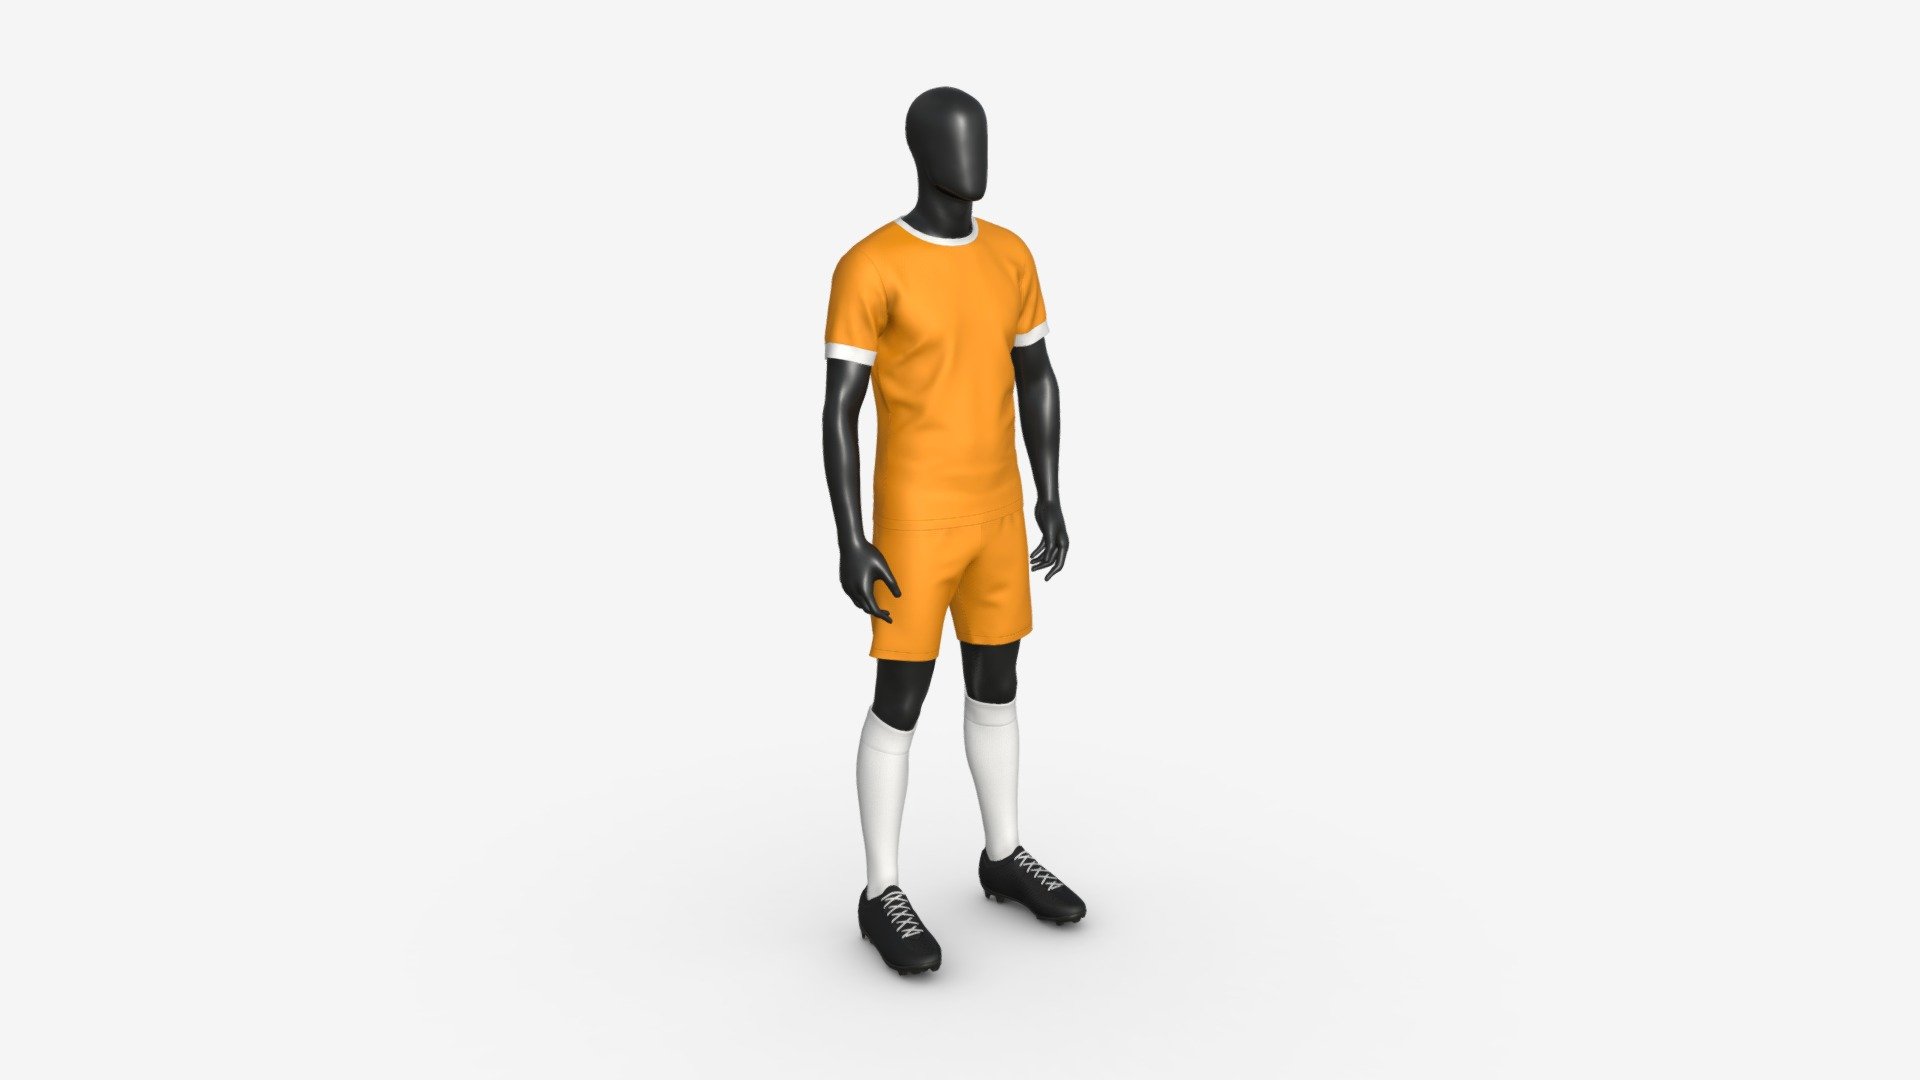 Male Mannequin in Soccer Uniform - Buy Royalty Free 3D model by HQ3DMOD (@AivisAstics) 3d model